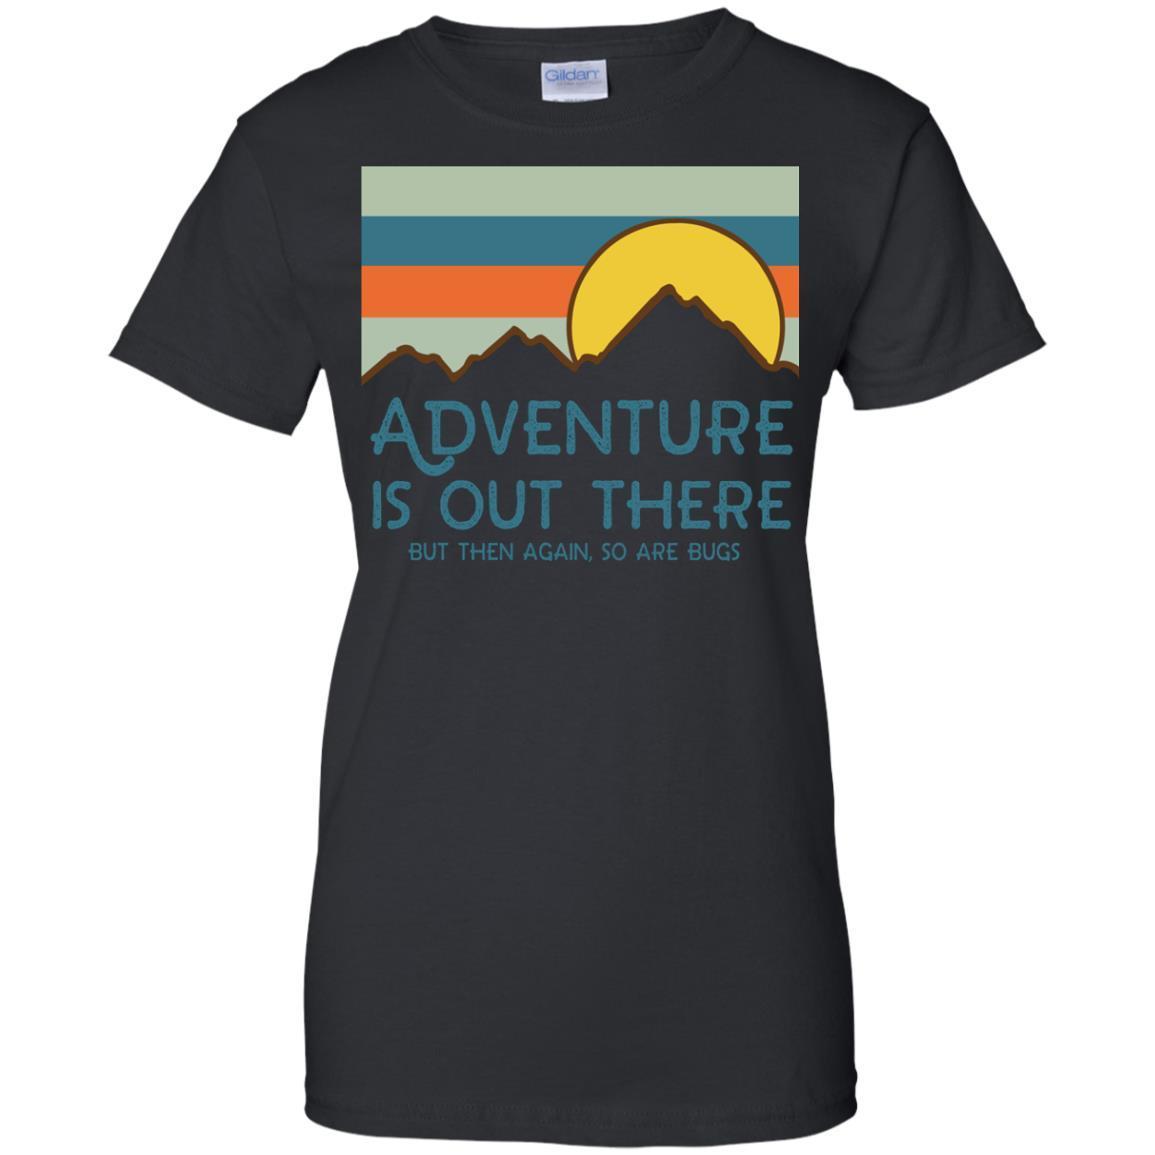 Adventure Is Out There But Then Again - So Are Bugs Shirt